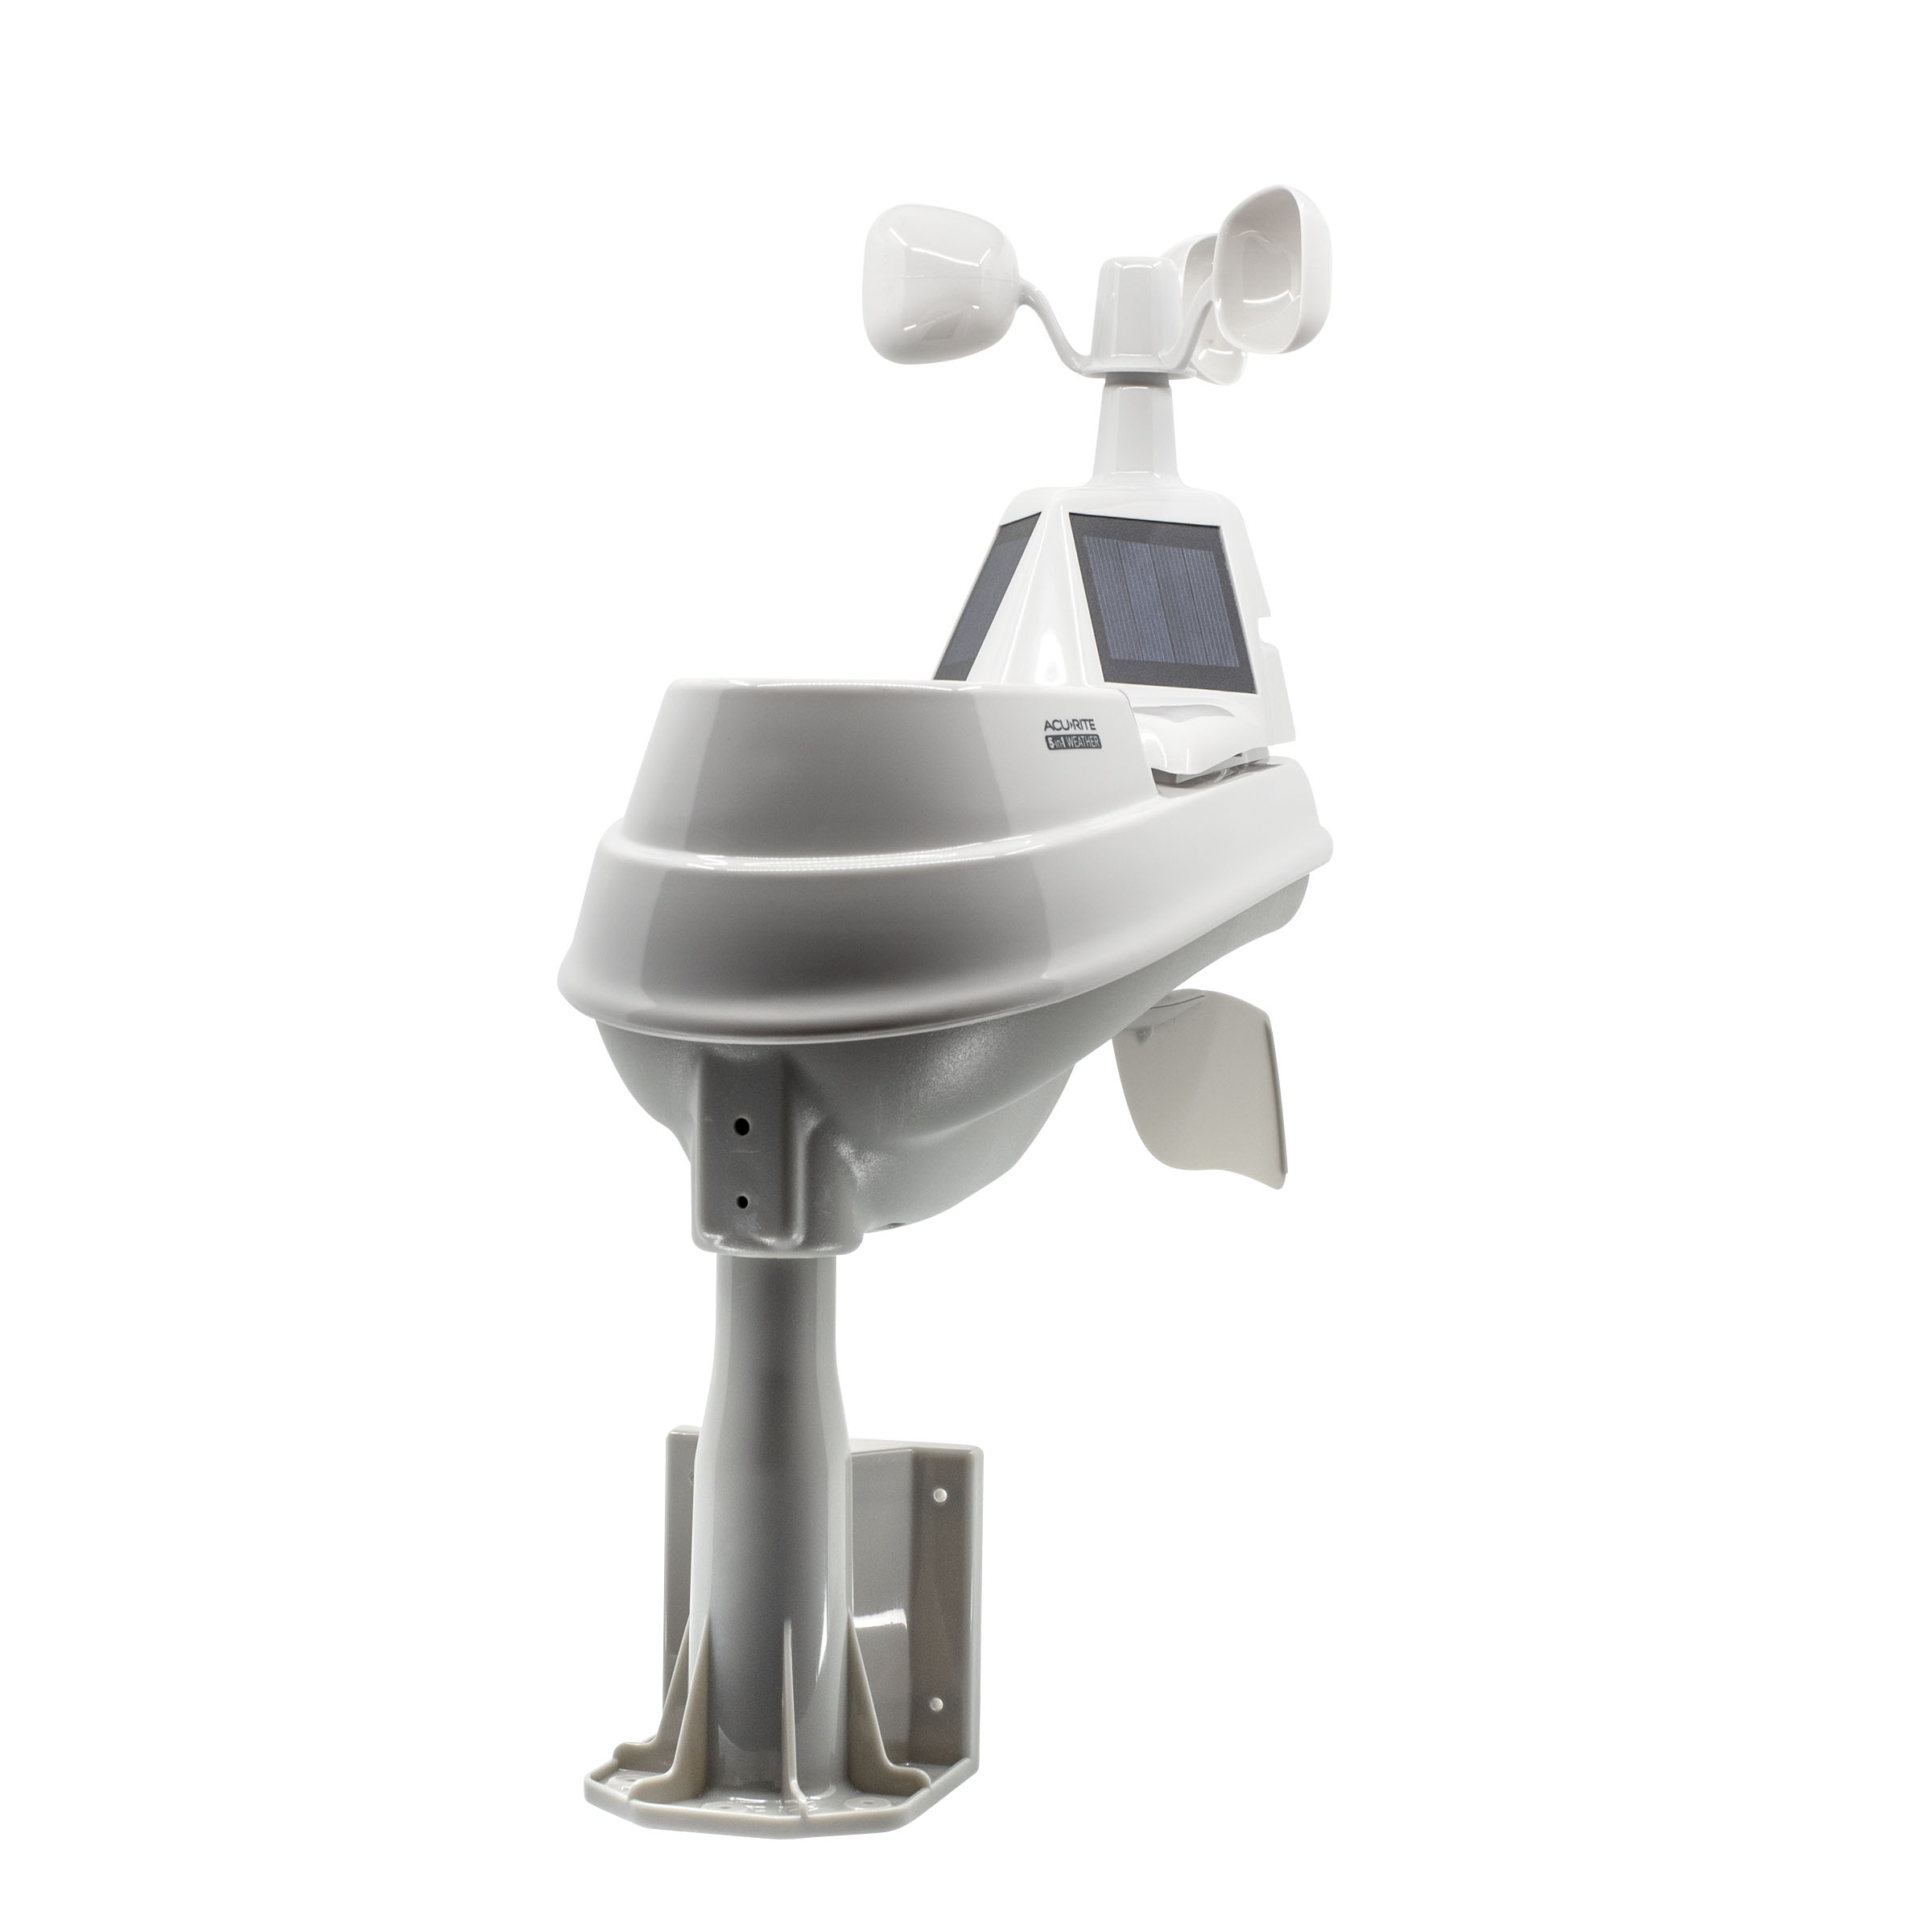 Acurite 5 in 1 Weather Station with Wi-Fi Connection to 'Weather Underground